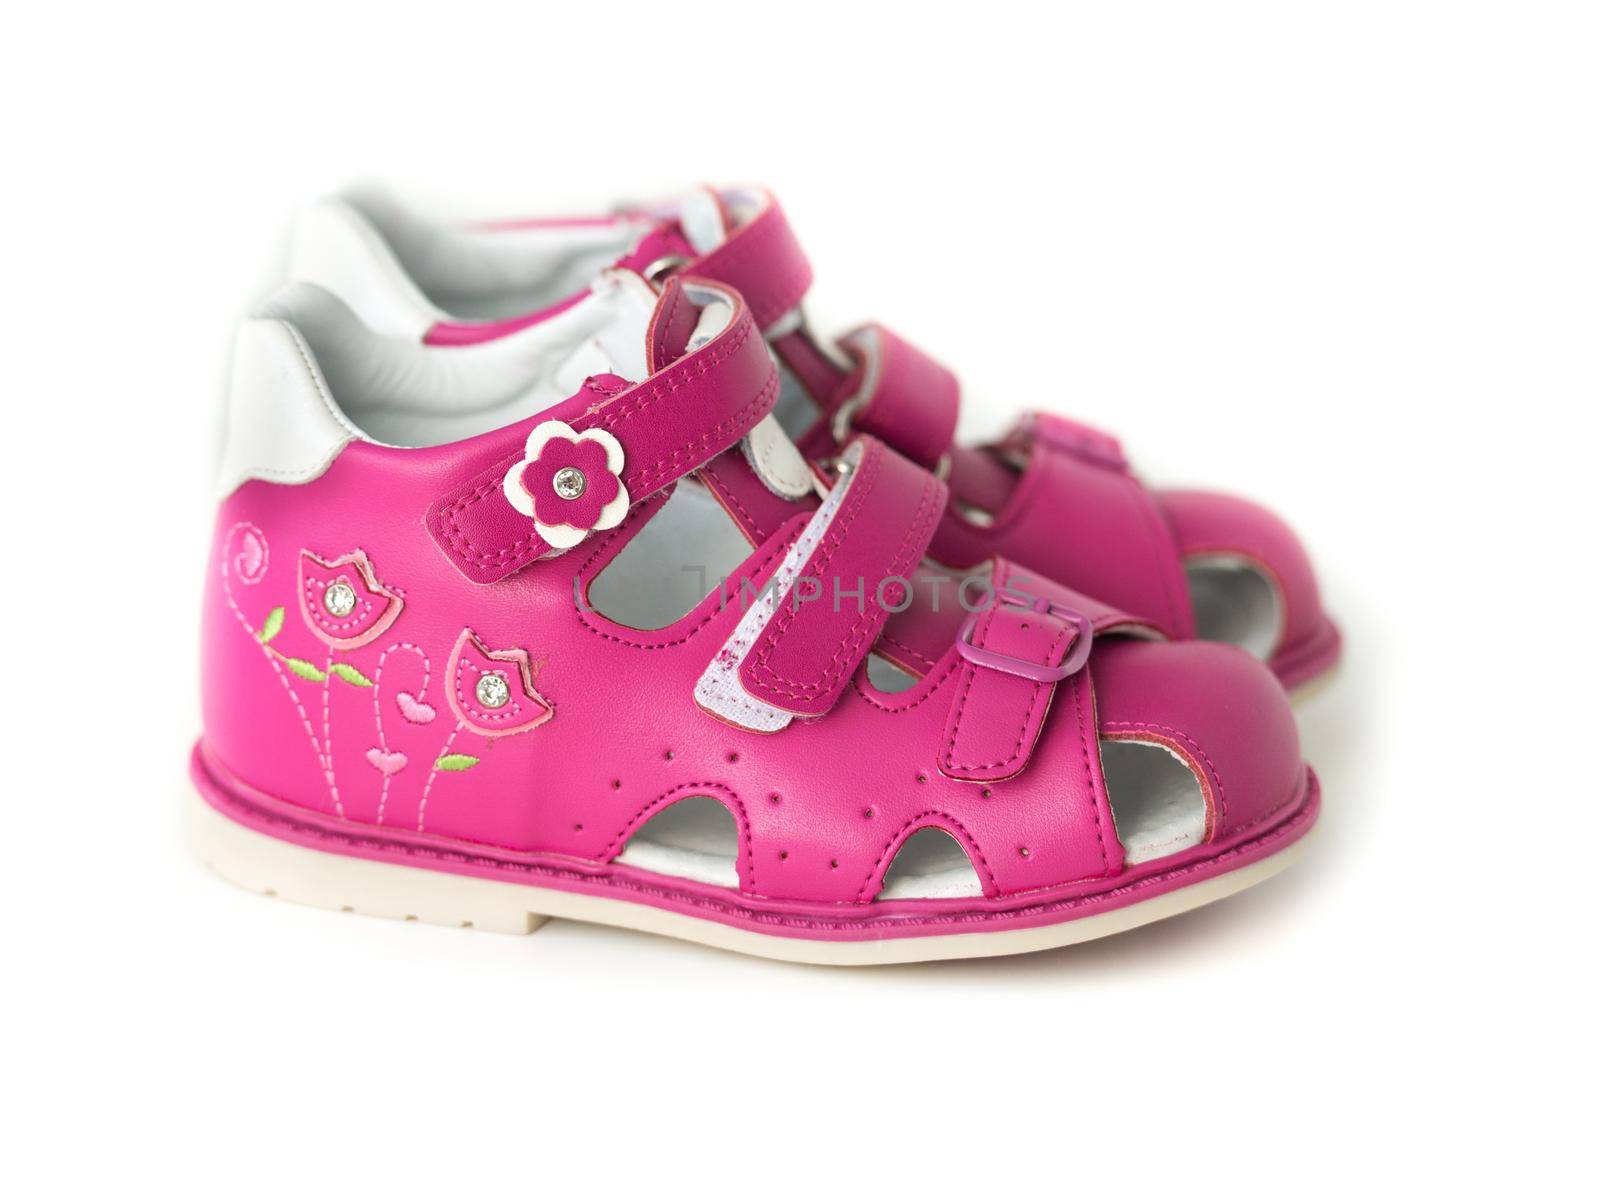 bright pink sandals for kids by tan4ikk1